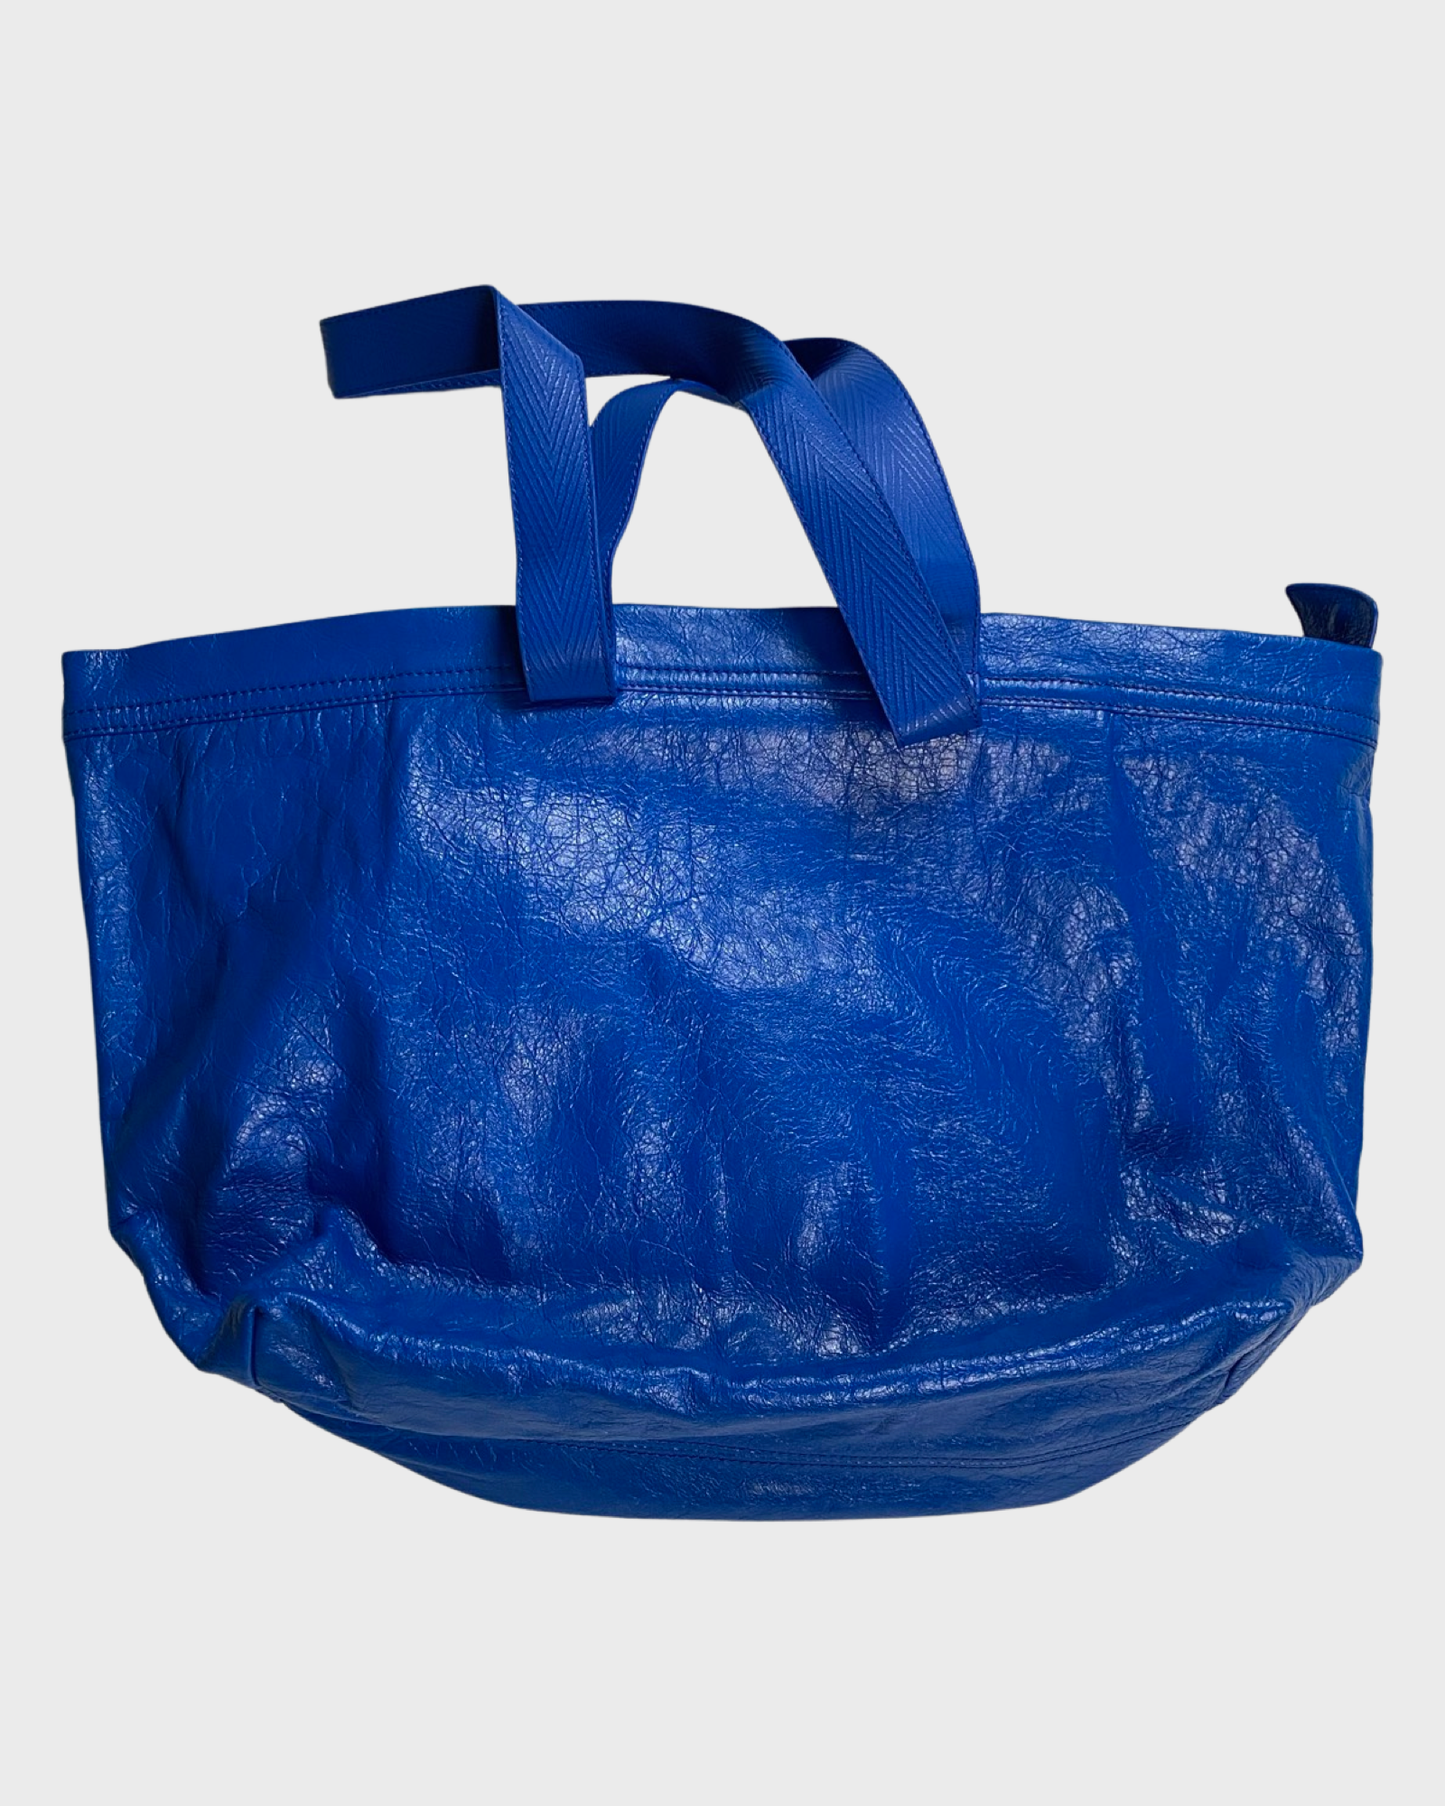 SS17 iconic runway IKEA leather bag in blue SIZE:OS